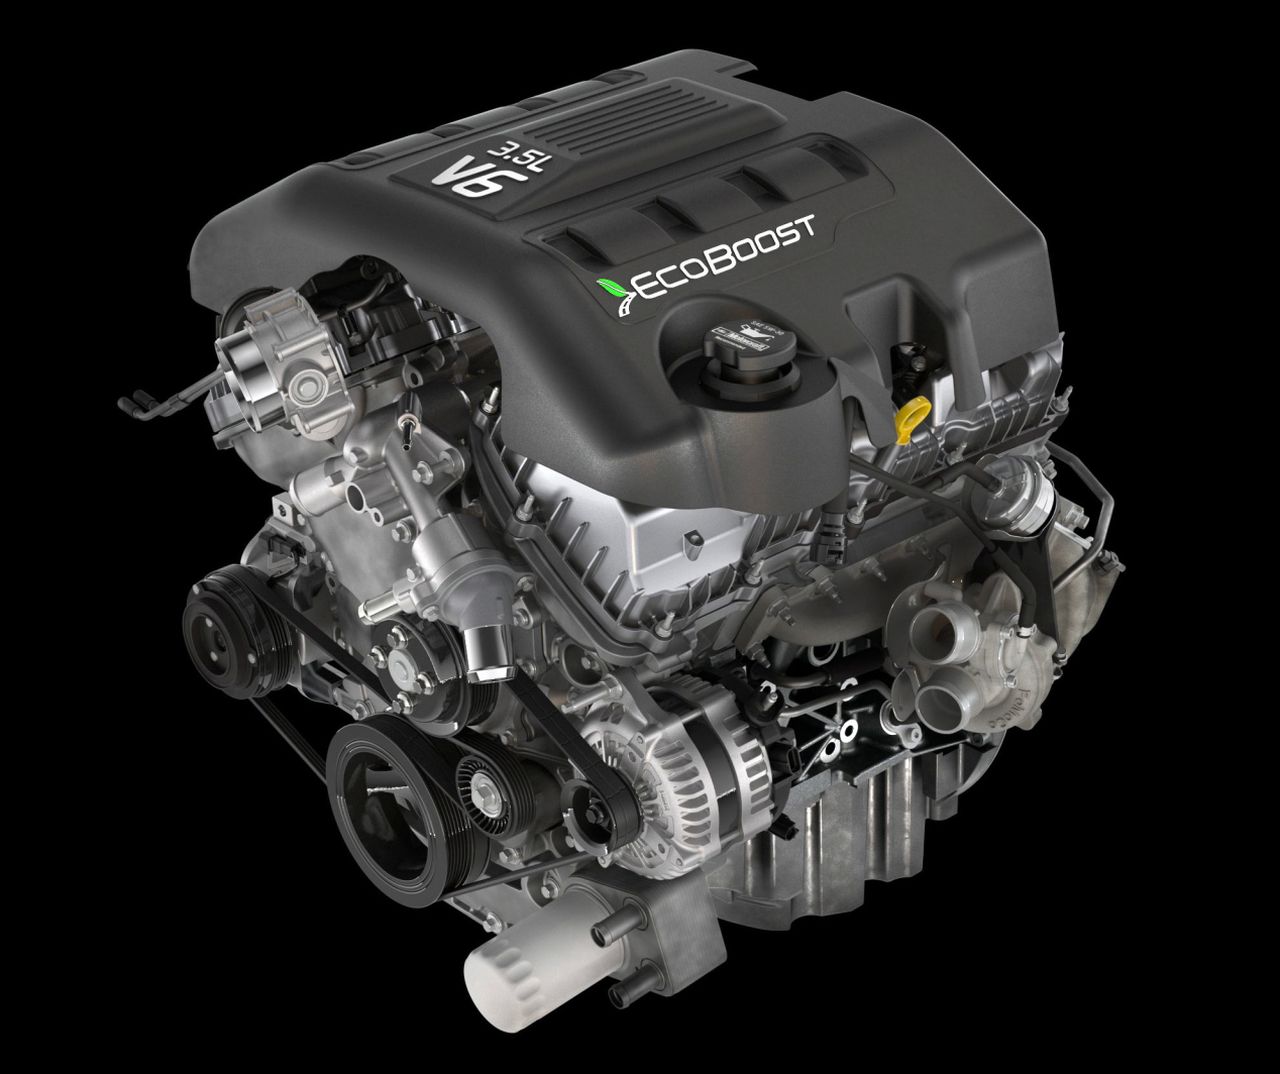 What Does EcoBoost Mean?